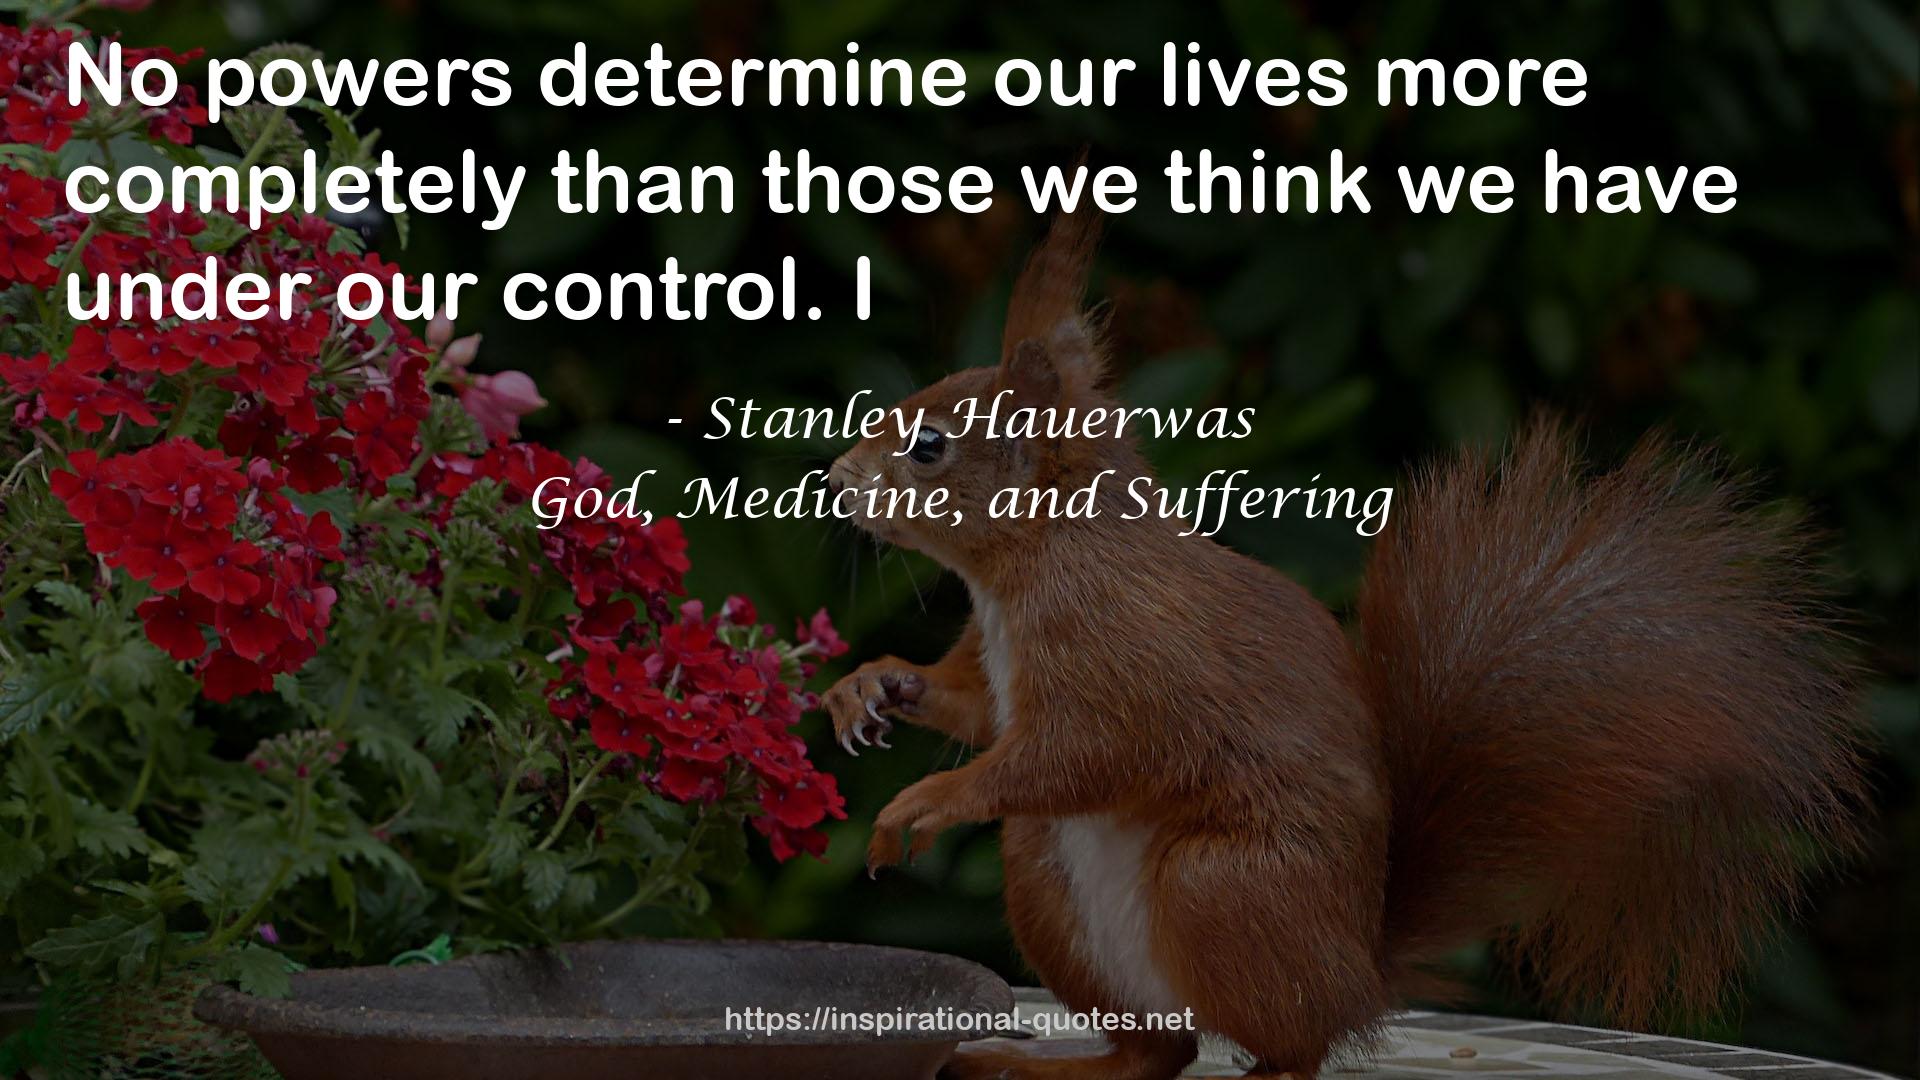 God, Medicine, and Suffering QUOTES